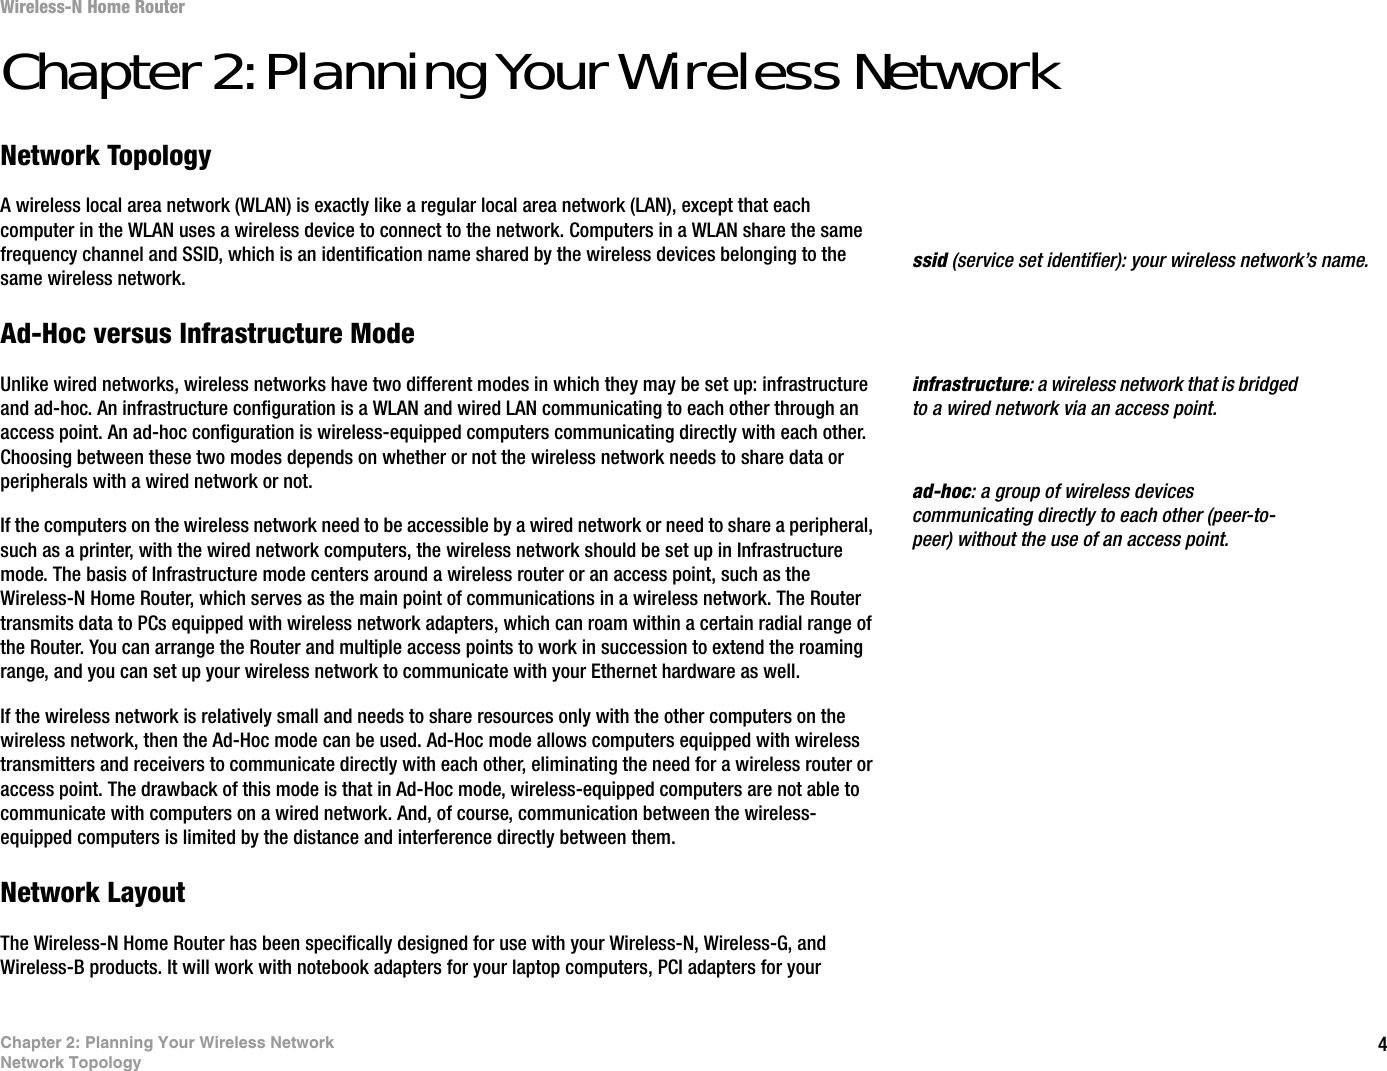 4Chapter 2: Planning Your Wireless NetworkNetwork TopologyWireless-N Home RouterChapter 2: Planning Your Wireless NetworkNetwork TopologyA wireless local area network (WLAN) is exactly like a regular local area network (LAN), except that each computer in the WLAN uses a wireless device to connect to the network. Computers in a WLAN share the same frequency channel and SSID, which is an identification name shared by the wireless devices belonging to the same wireless network.Ad-Hoc versus Infrastructure ModeUnlike wired networks, wireless networks have two different modes in which they may be set up: infrastructure and ad-hoc. An infrastructure configuration is a WLAN and wired LAN communicating to each other through an access point. An ad-hoc configuration is wireless-equipped computers communicating directly with each other. Choosing between these two modes depends on whether or not the wireless network needs to share data or peripherals with a wired network or not. If the computers on the wireless network need to be accessible by a wired network or need to share a peripheral, such as a printer, with the wired network computers, the wireless network should be set up in Infrastructure mode. The basis of Infrastructure mode centers around a wireless router or an access point, such as the Wireless-N Home Router, which serves as the main point of communications in a wireless network. The Router transmits data to PCs equipped with wireless network adapters, which can roam within a certain radial range of the Router. You can arrange the Router and multiple access points to work in succession to extend the roaming range, and you can set up your wireless network to communicate with your Ethernet hardware as well. If the wireless network is relatively small and needs to share resources only with the other computers on the wireless network, then the Ad-Hoc mode can be used. Ad-Hoc mode allows computers equipped with wireless transmitters and receivers to communicate directly with each other, eliminating the need for a wireless router or access point. The drawback of this mode is that in Ad-Hoc mode, wireless-equipped computers are not able to communicate with computers on a wired network. And, of course, communication between the wireless-equipped computers is limited by the distance and interference directly between them. Network LayoutThe Wireless-N Home Router has been specifically designed for use with your Wireless-N, Wireless-G, and Wireless-B products. It will work with notebook adapters for your laptop computers, PCI adapters for your infrastructure: a wireless network that is bridged to a wired network via an access point.ssid (service set identifier): your wireless network’s name.ad-hoc: a group of wireless devices communicating directly to each other (peer-to-peer) without the use of an access point.